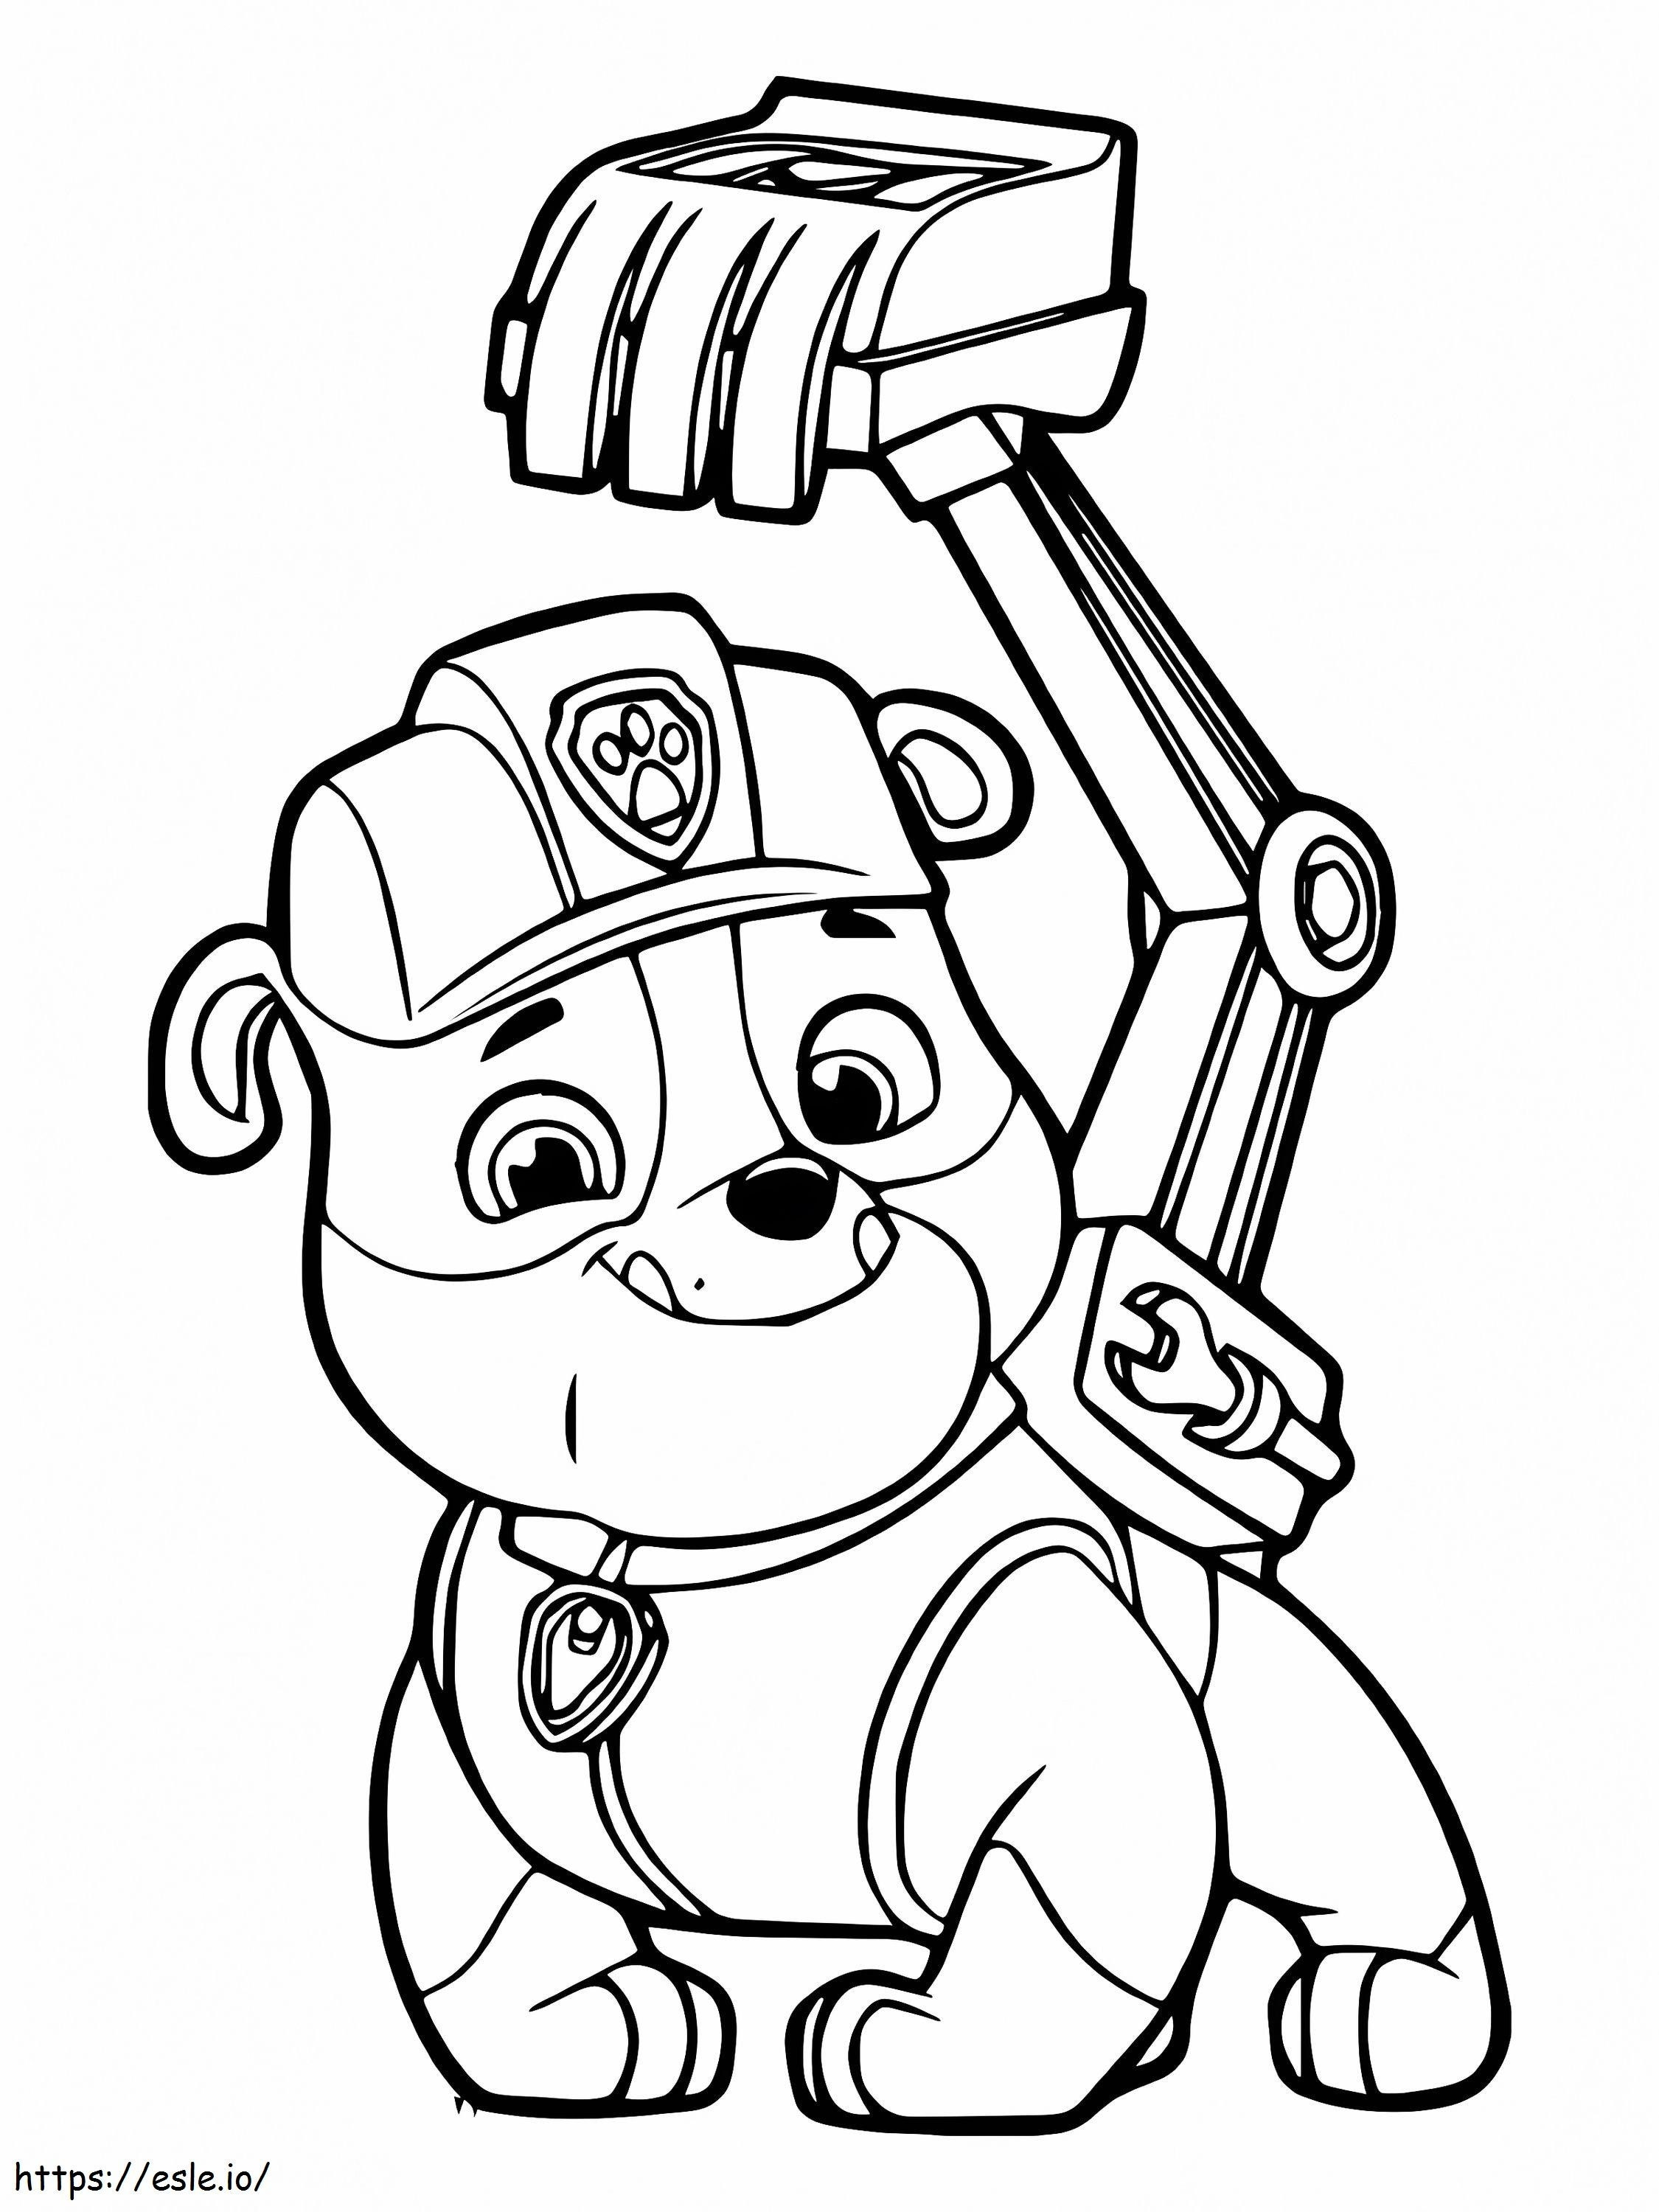 Rubble And His Digger Equipment coloring page